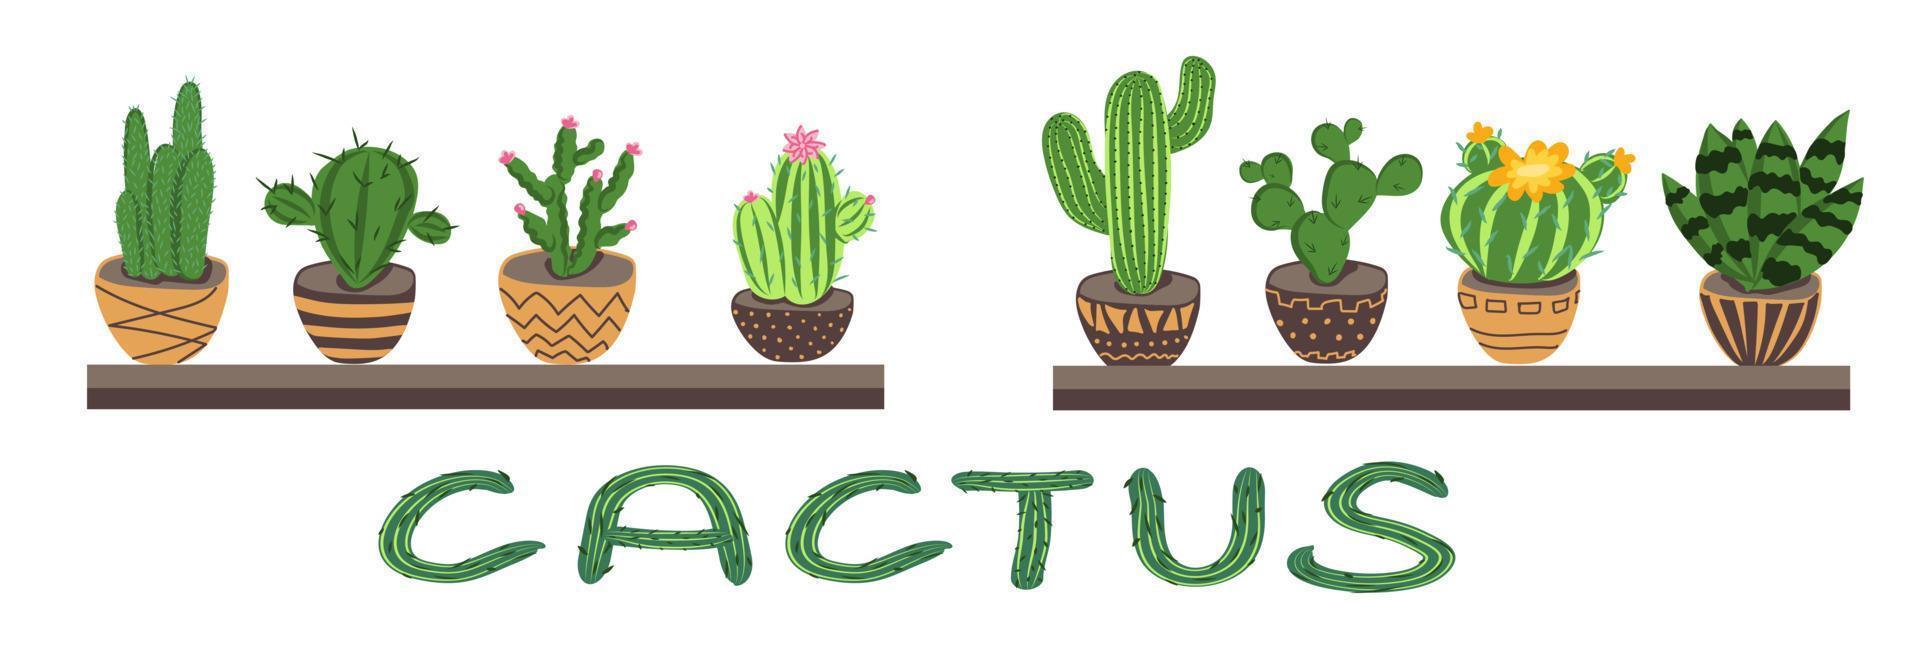 Vector set of colorful cactus plants in  pots.